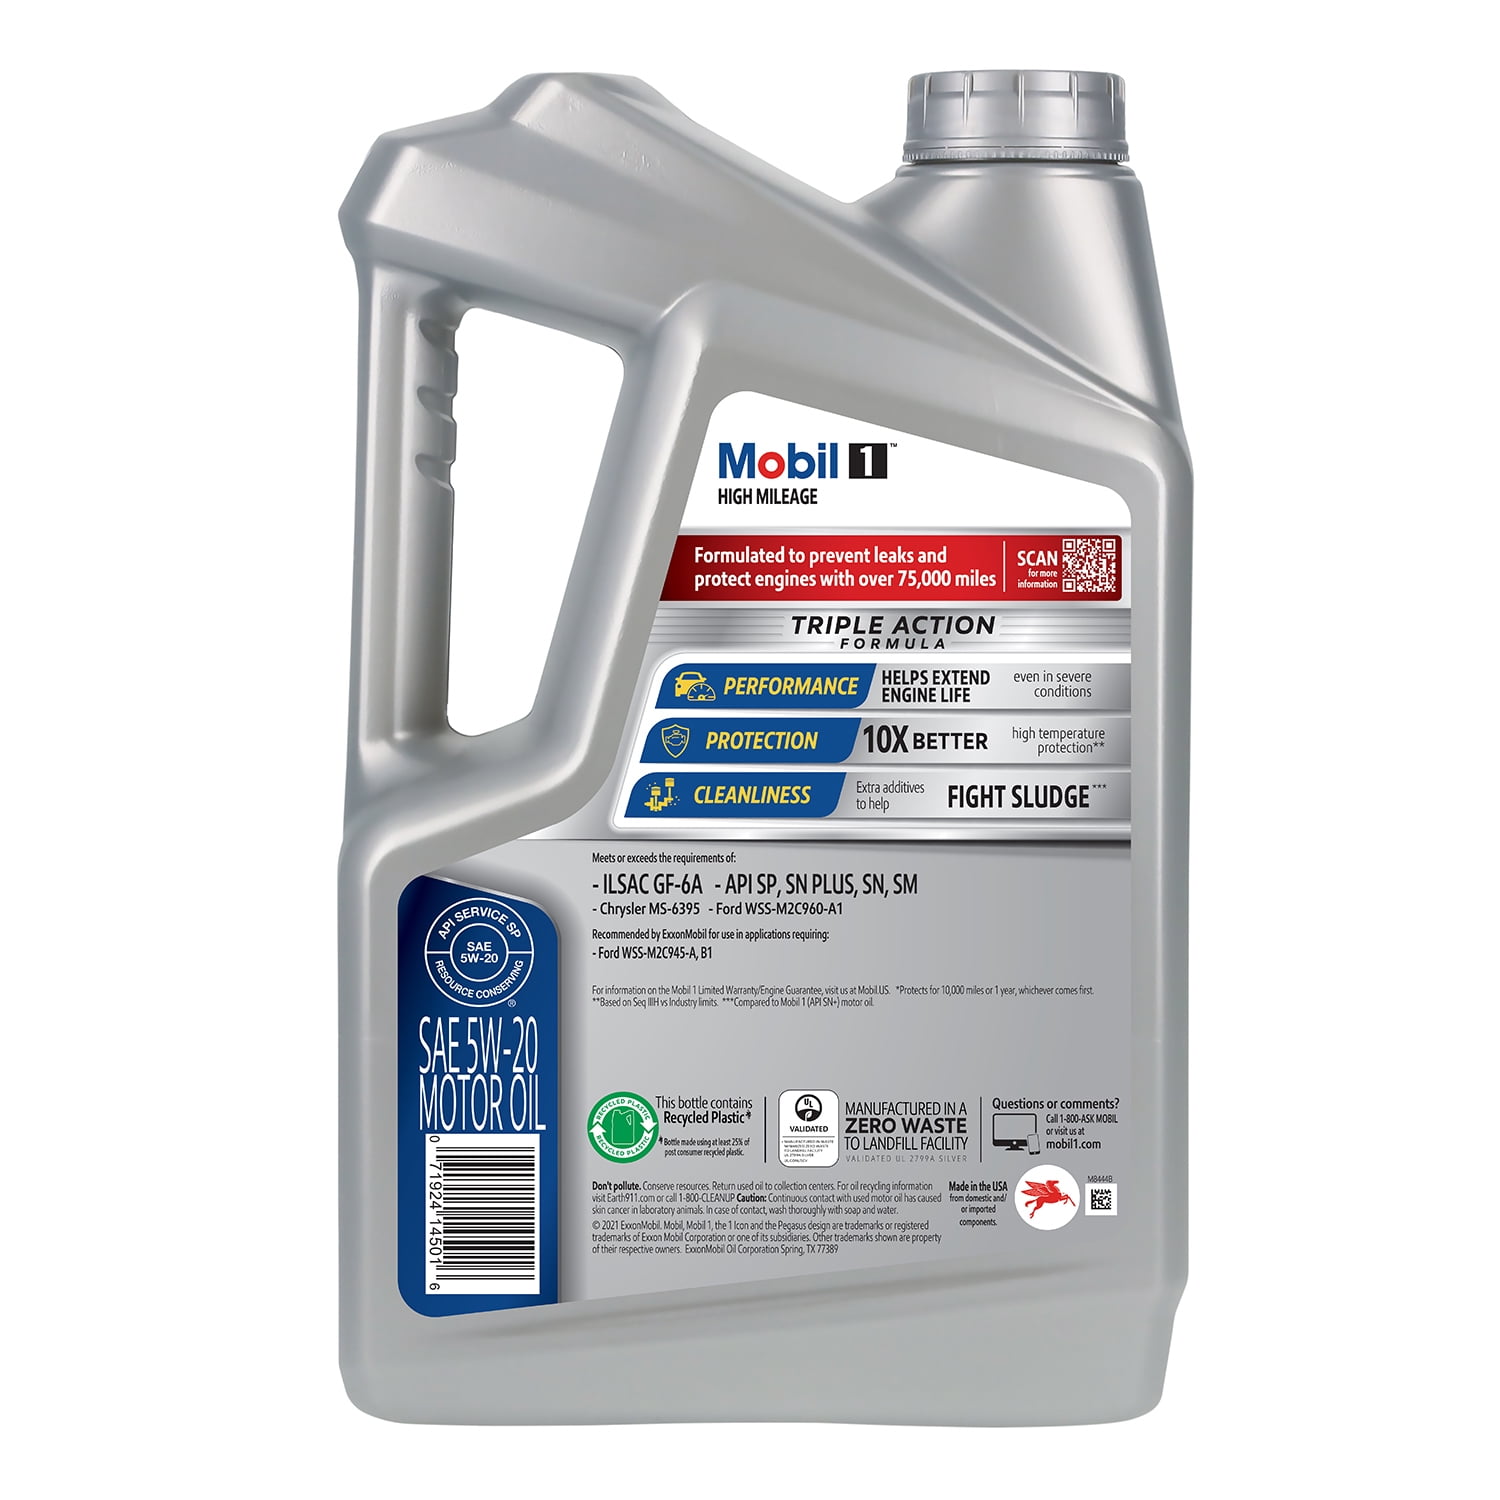 Mobil 1 High Mileage Full Synthetic Motor Oil 5W-20, 5 qt (3 Pack) - 2